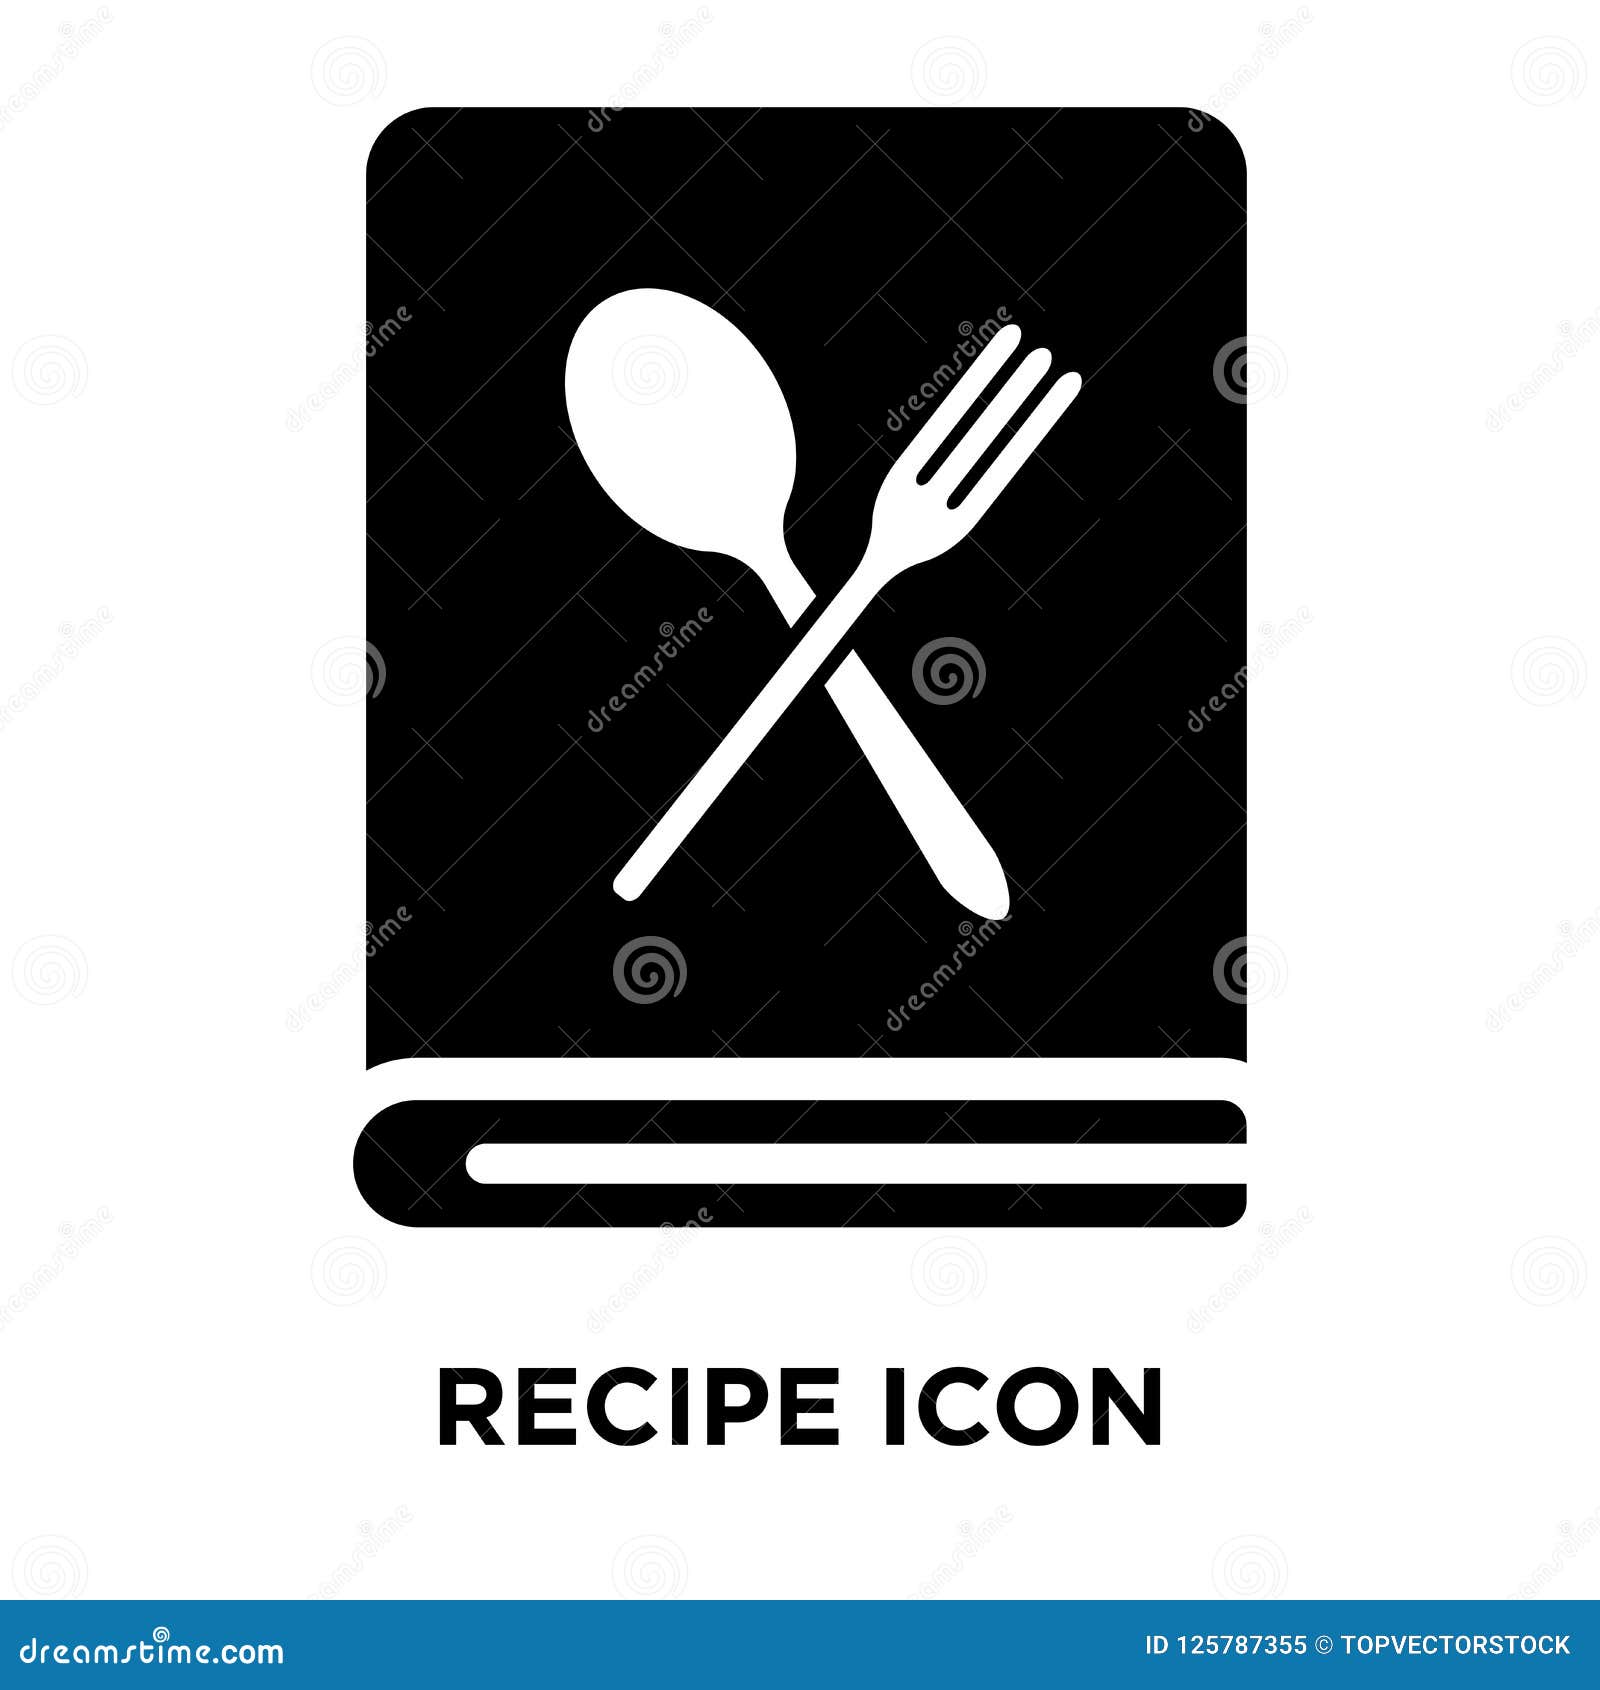 Recipe Icon Vector Isolated on White Background, Logo Concept of Stock